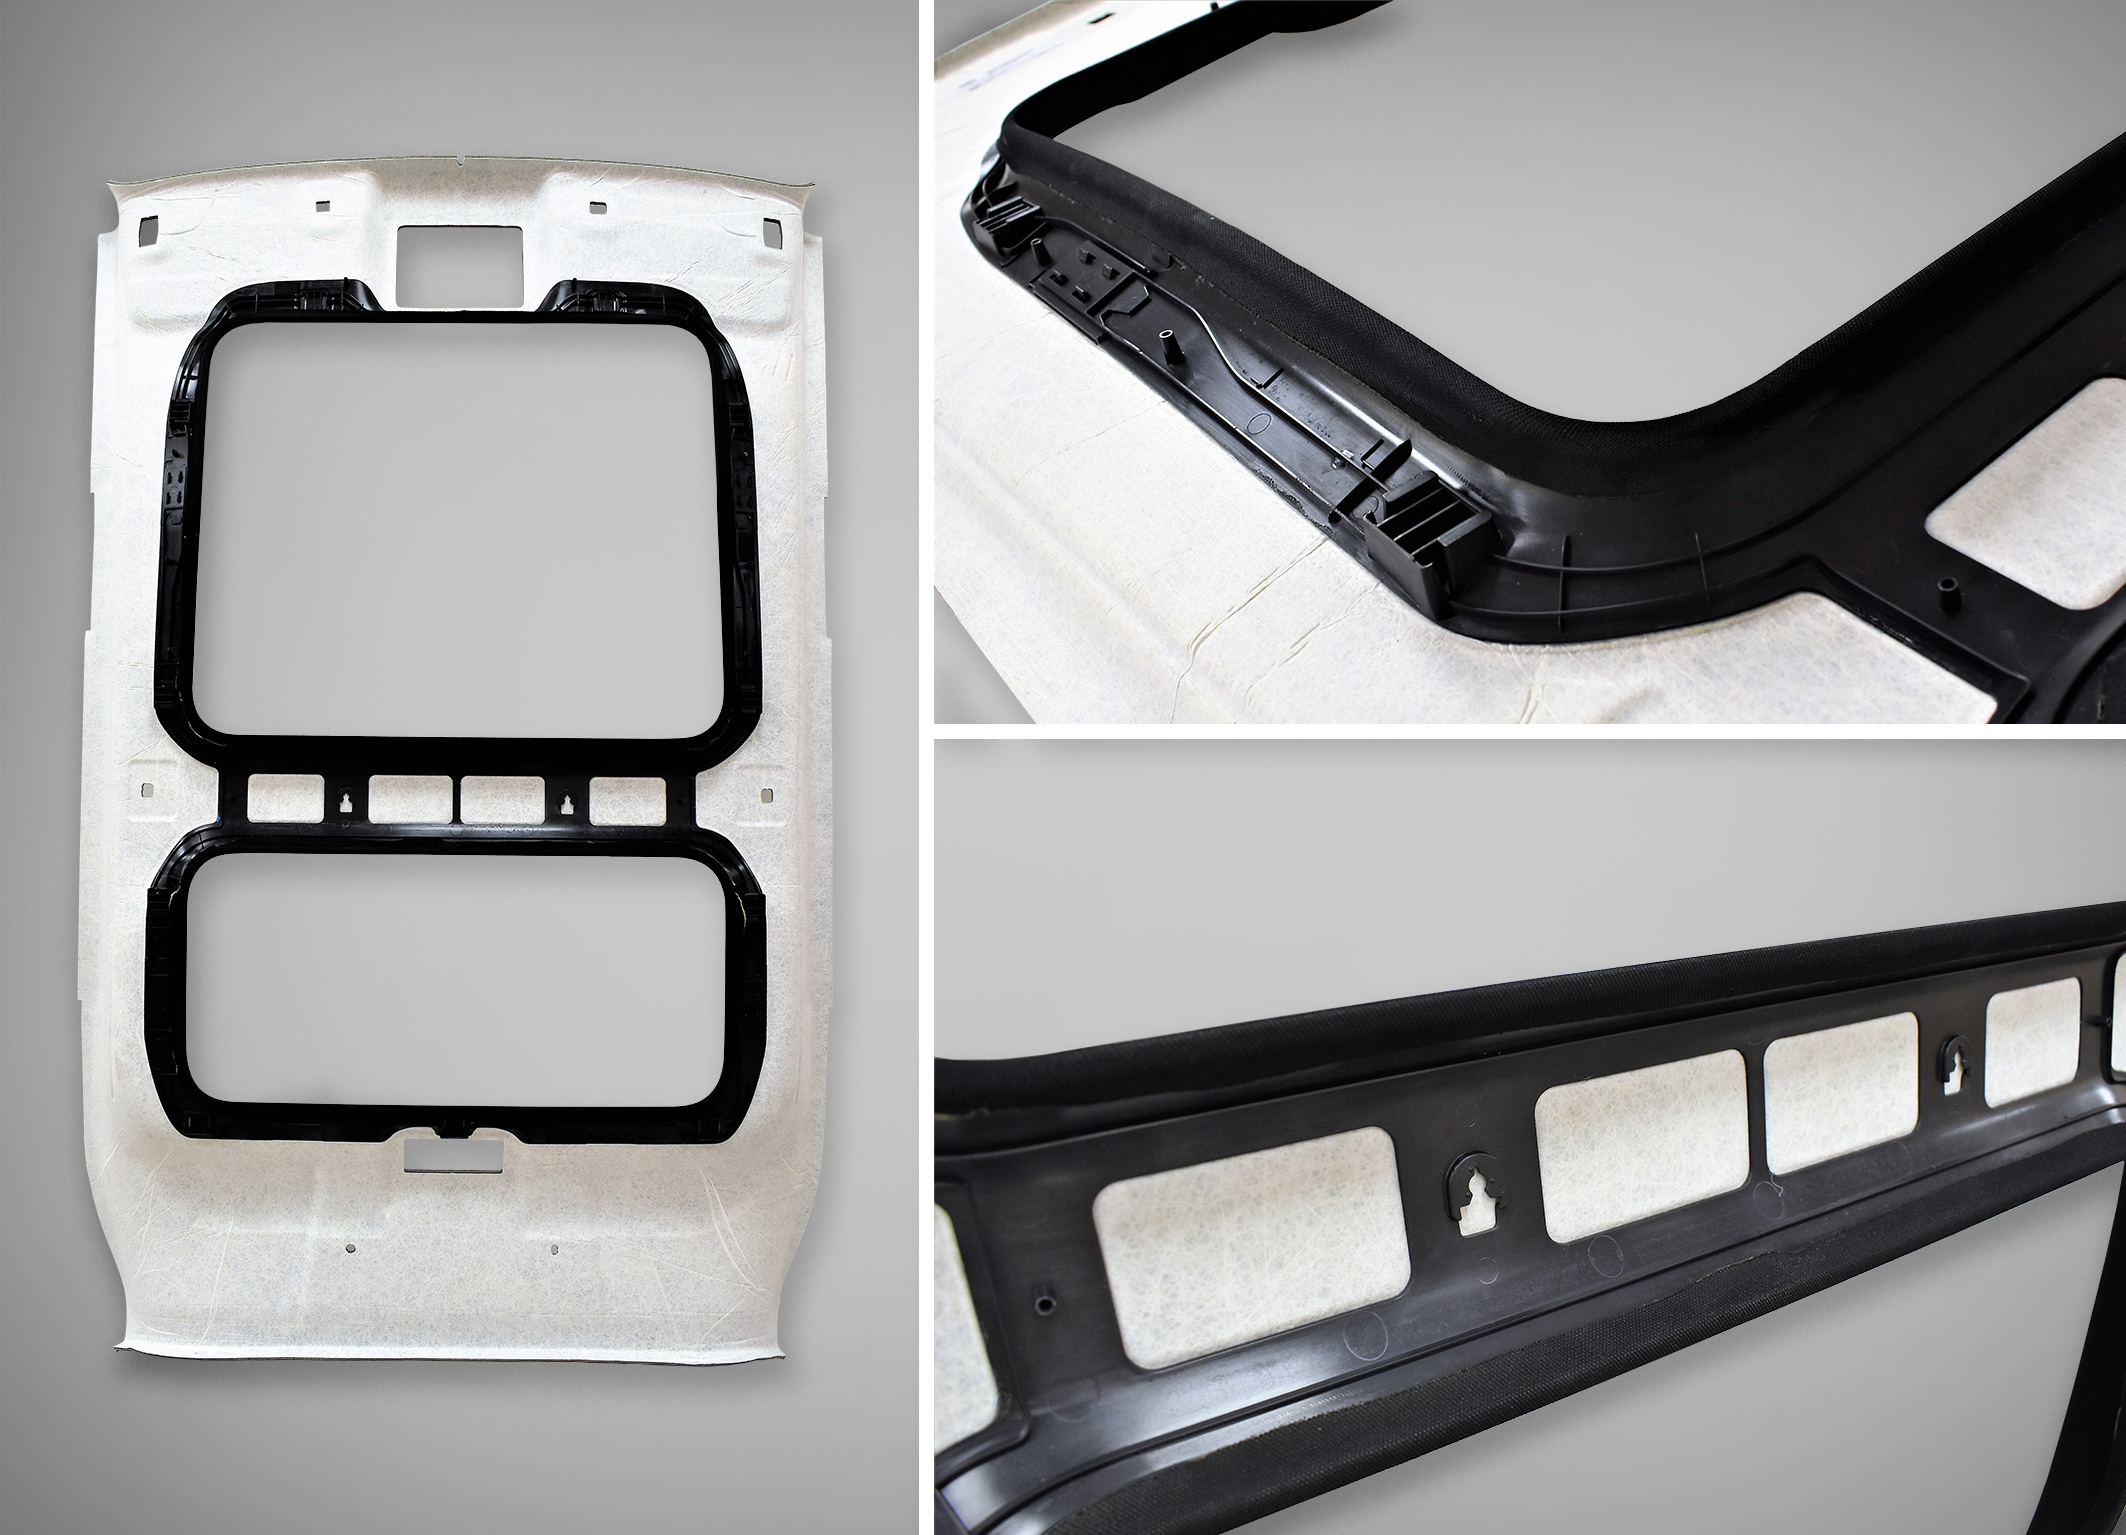 The sunroof opening in the headliner is supported by a structural bracket traditionally made of heavy steel.